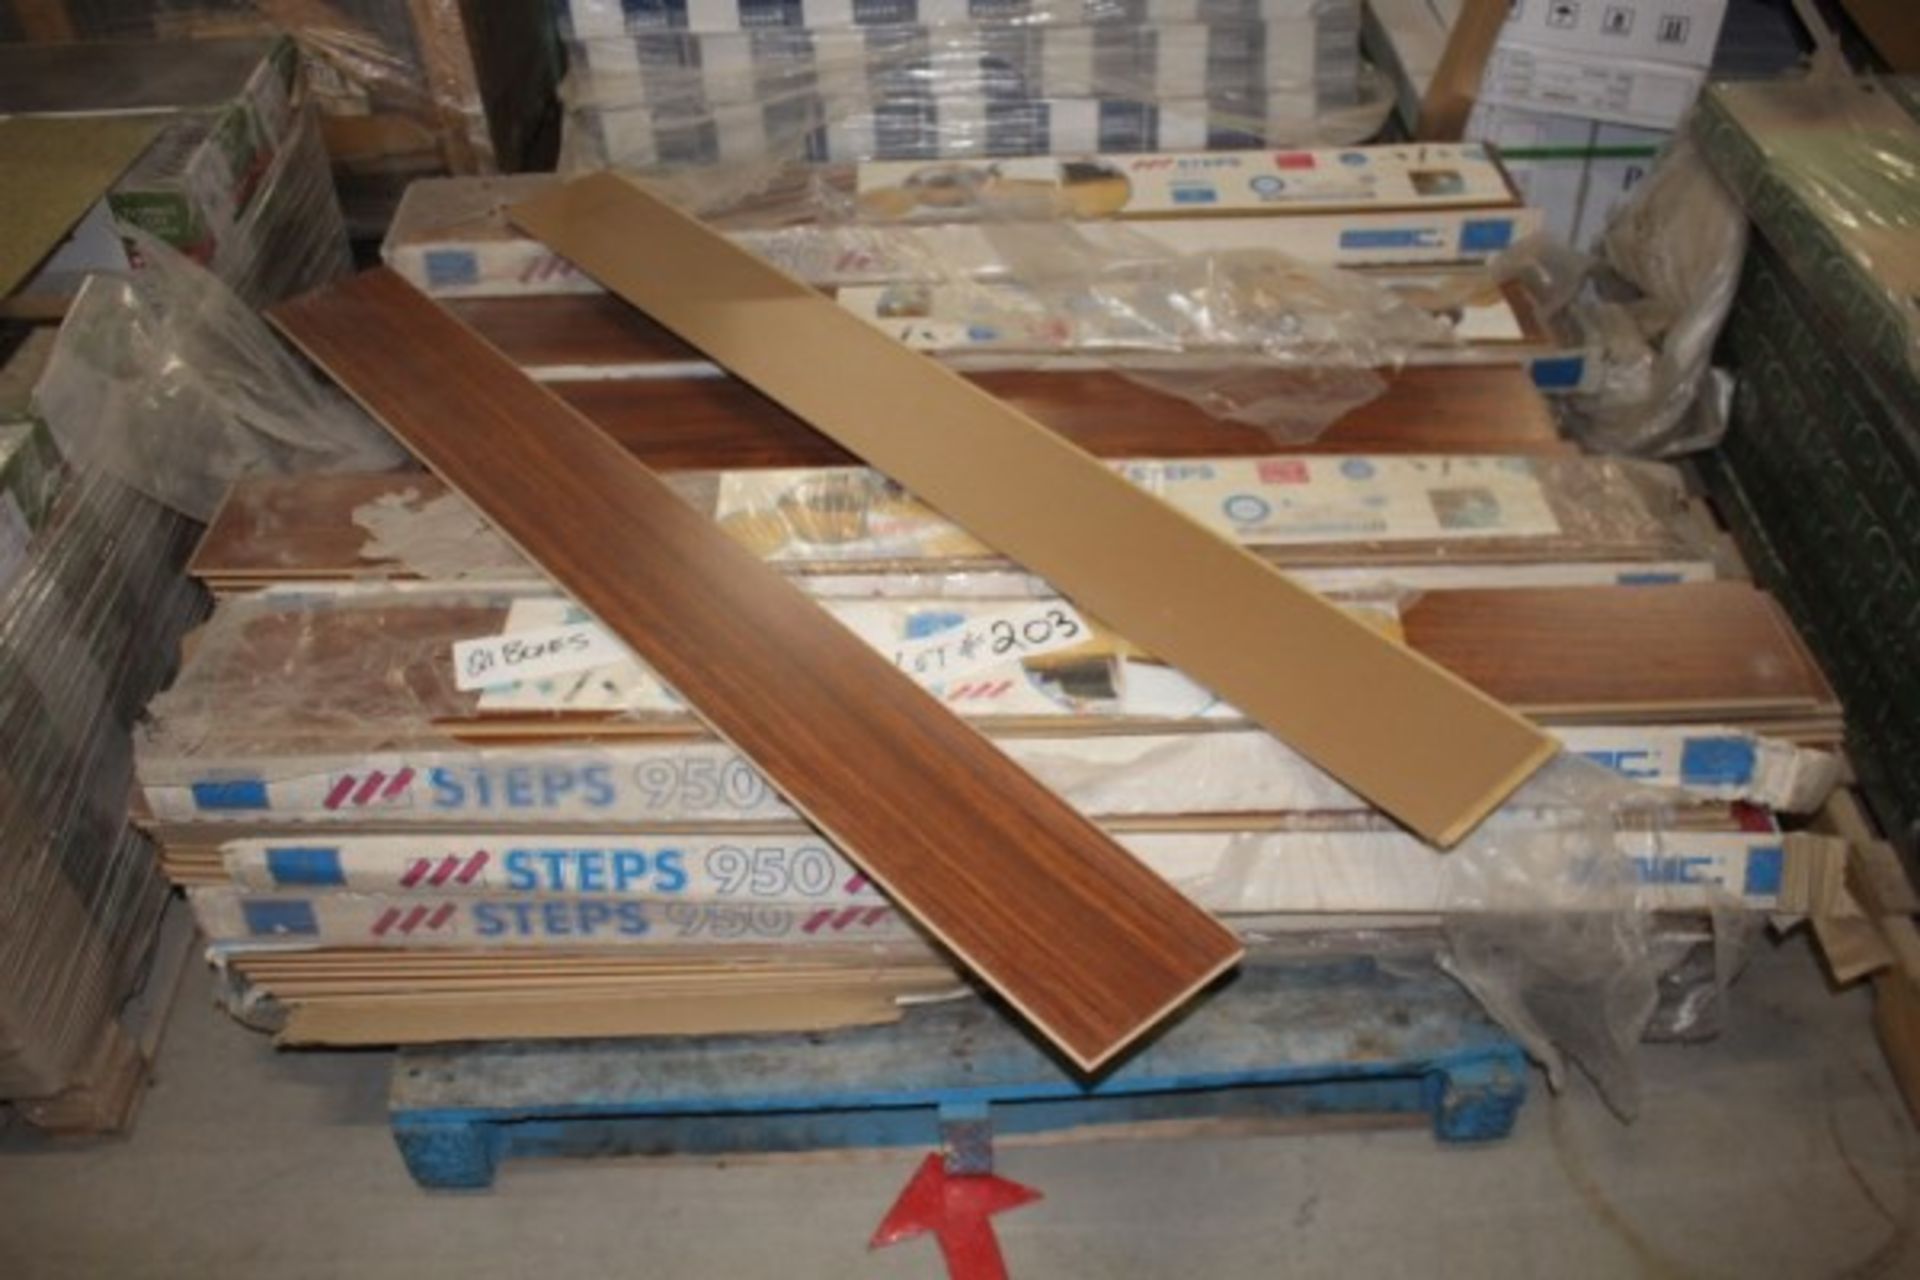 Pallet lot of steps uniclick laminate flooring 21 boxes aprox 340 sq ft